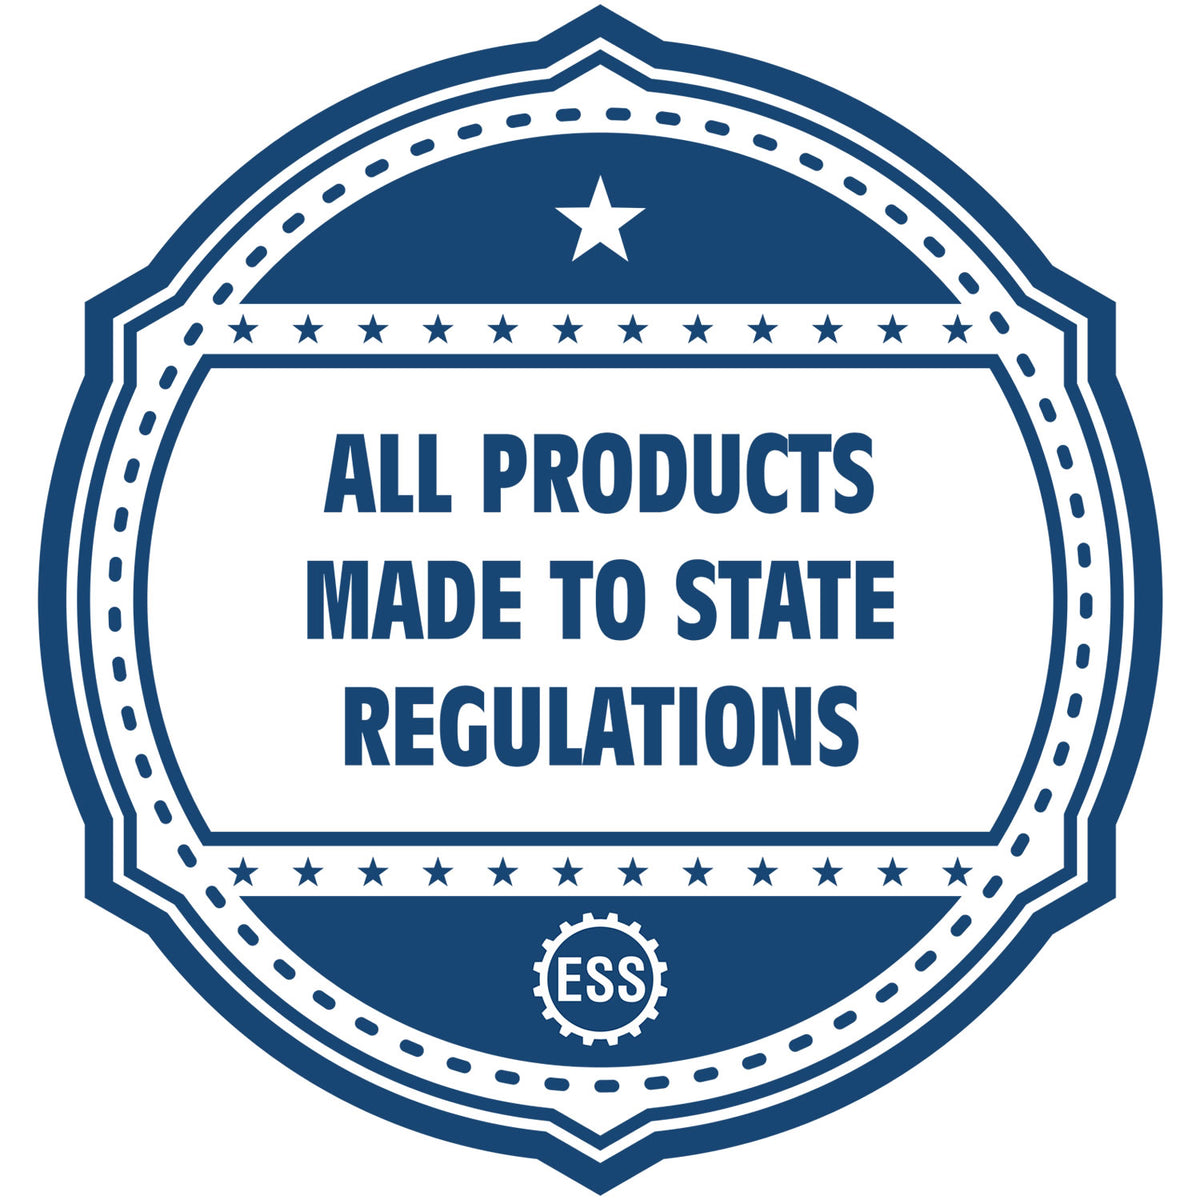 A blue icon or badge for the Hybrid Michigan Engineer Seal showing that this product is made in compliance with state regulations.